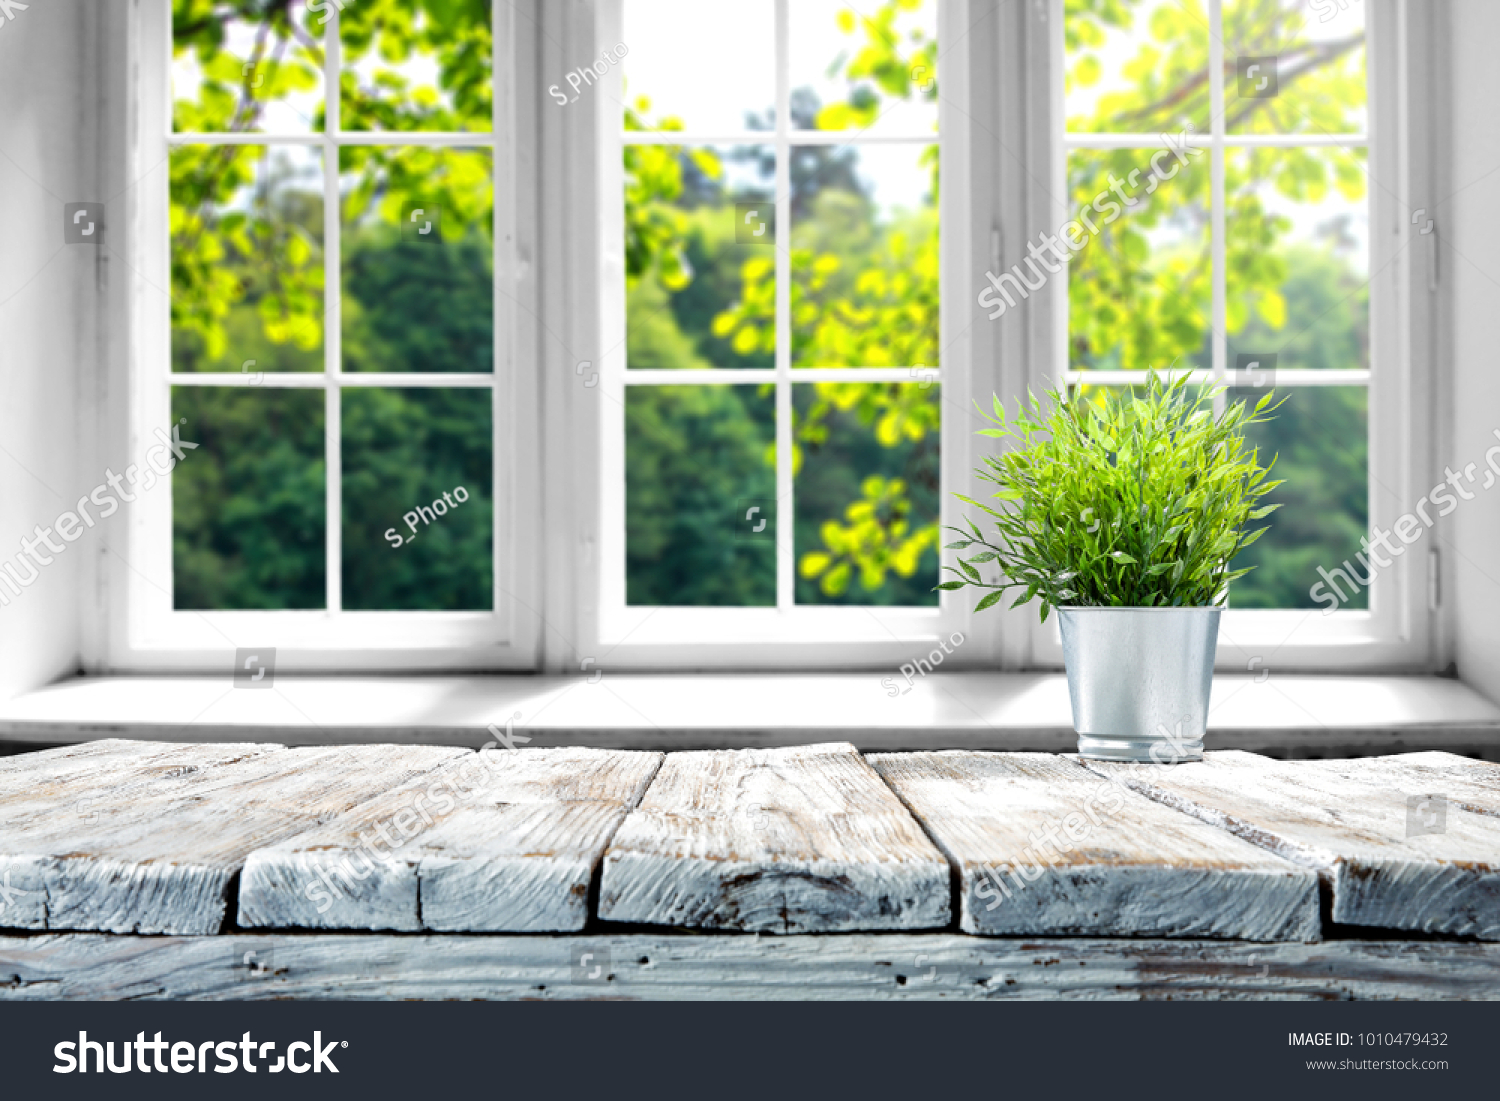 Desk of free space with green plant and window of spring time  #1010479432